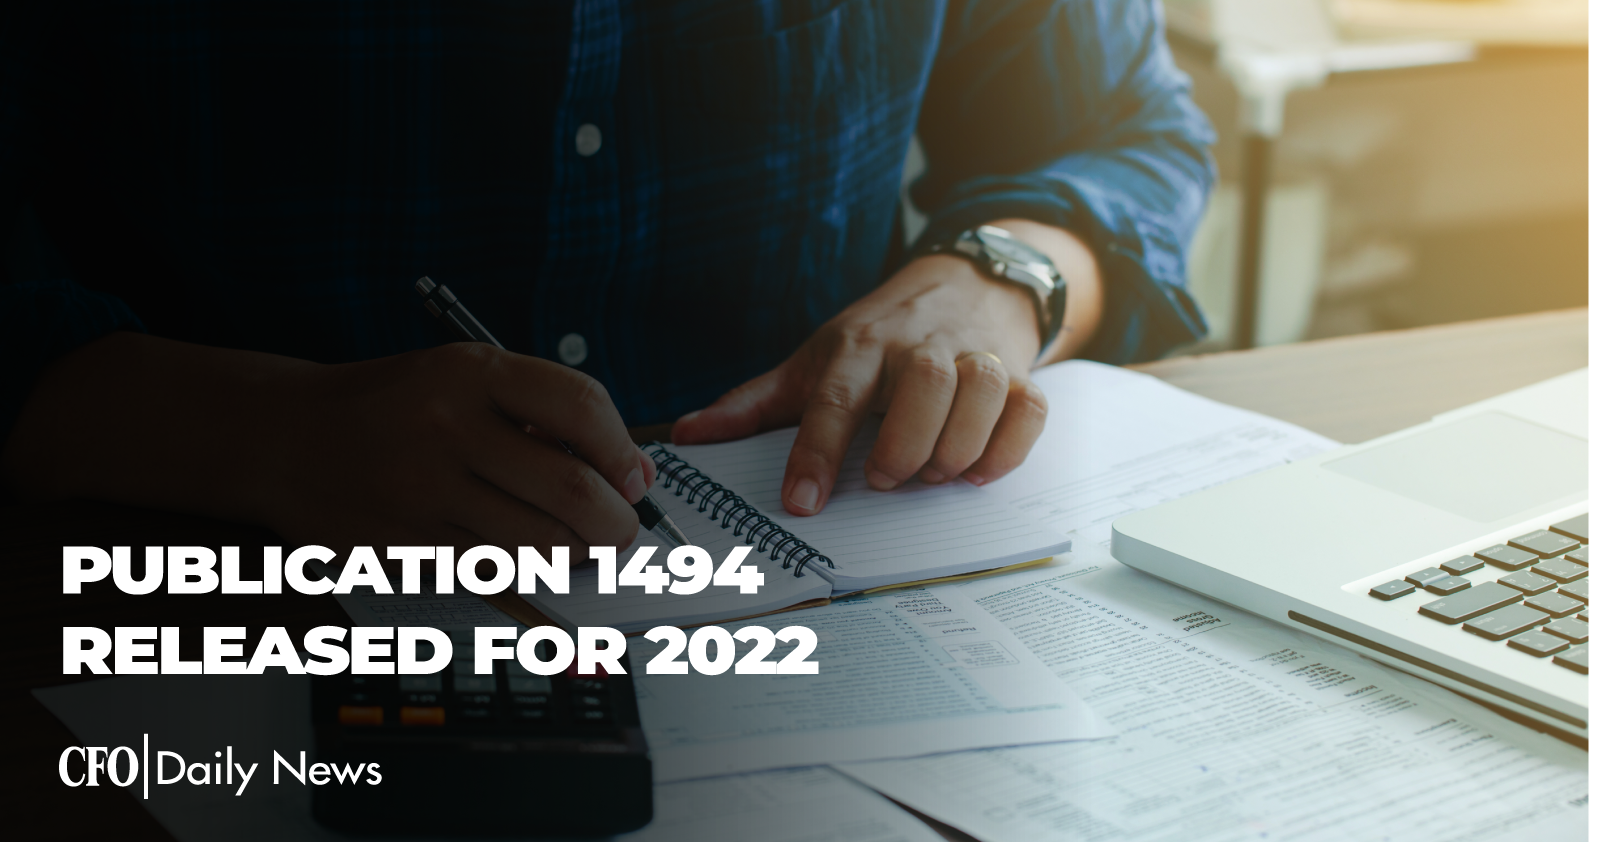 Publication 1494 Released For 2022